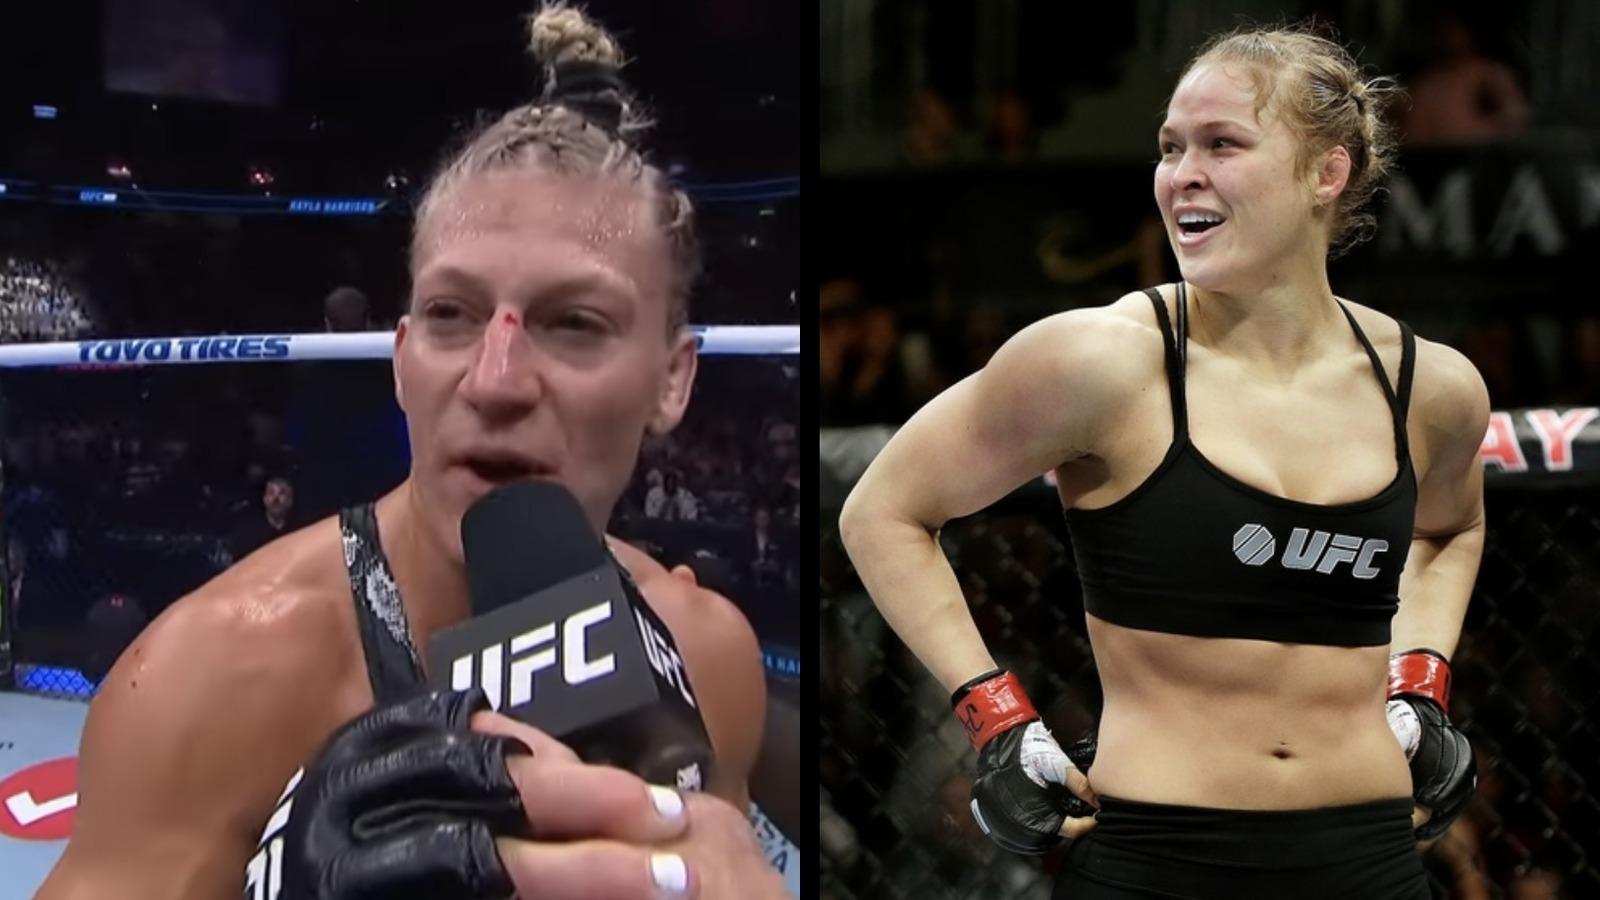 Kayla Harrison has the potential to be an even bigger UFC star than Ronda Rousey